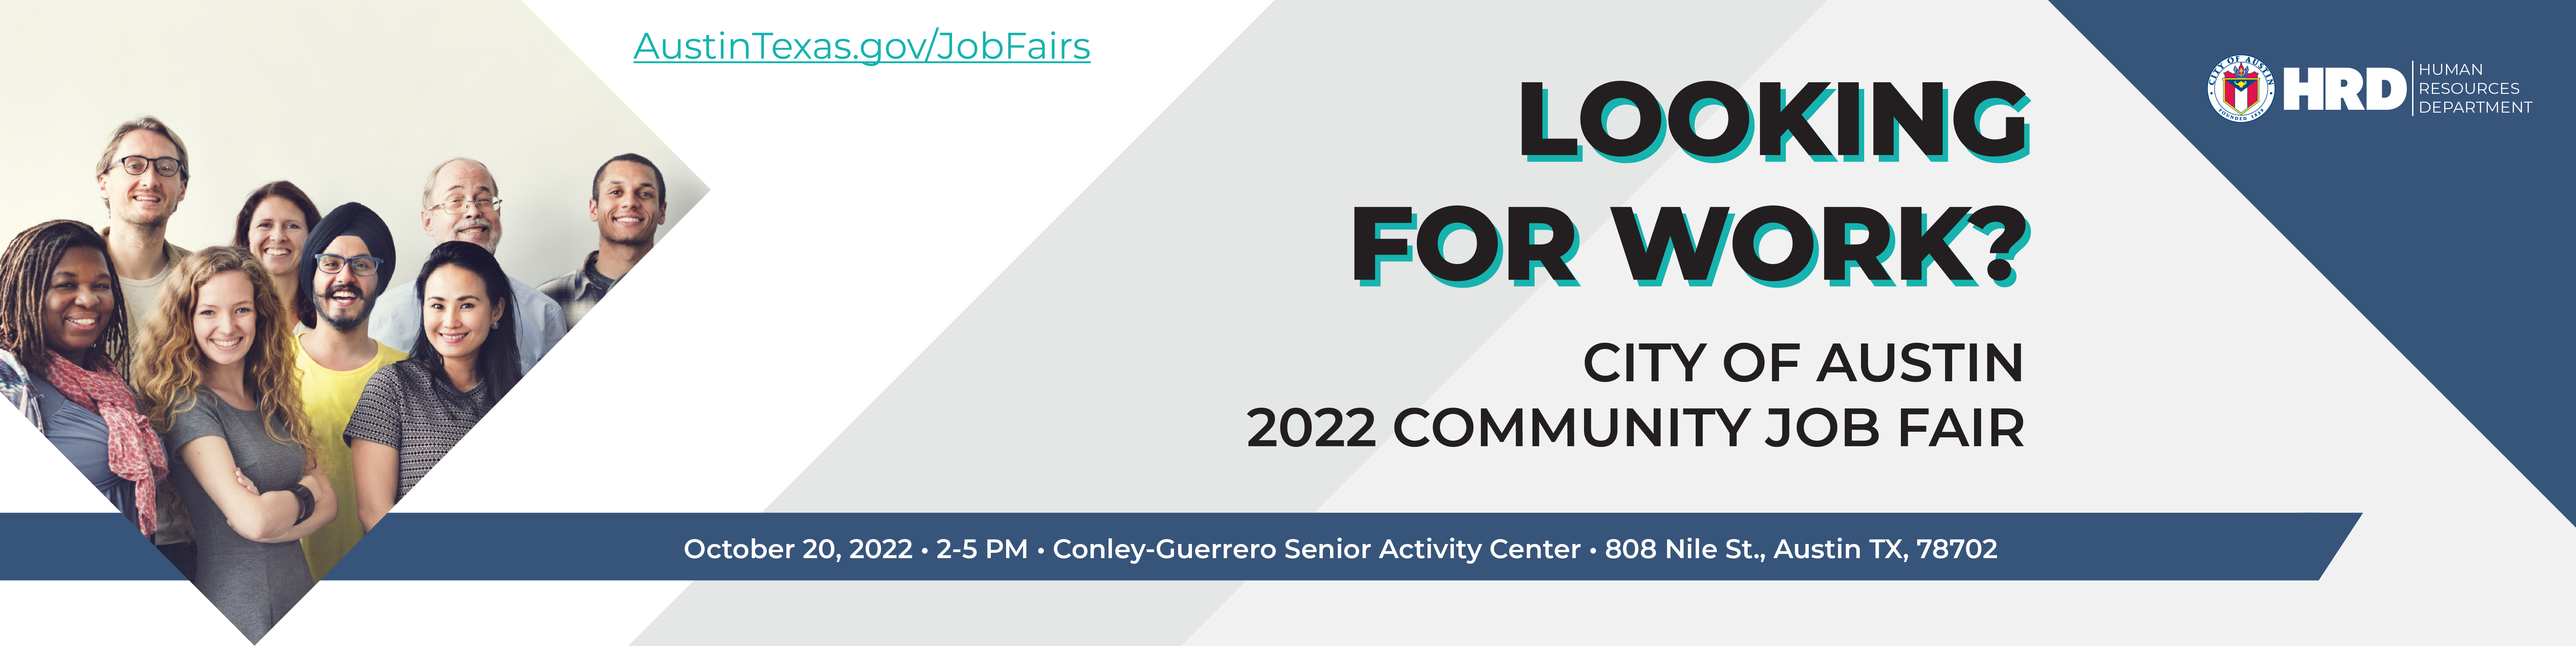 Looking for work? Join us at the City of Austin Job Fair on Oct. 20, 2022 from 2-5 p.m. at the Conley-Guerrero Senior Activity Centr, 808 Nile Street, Austin, Texas, 78702.